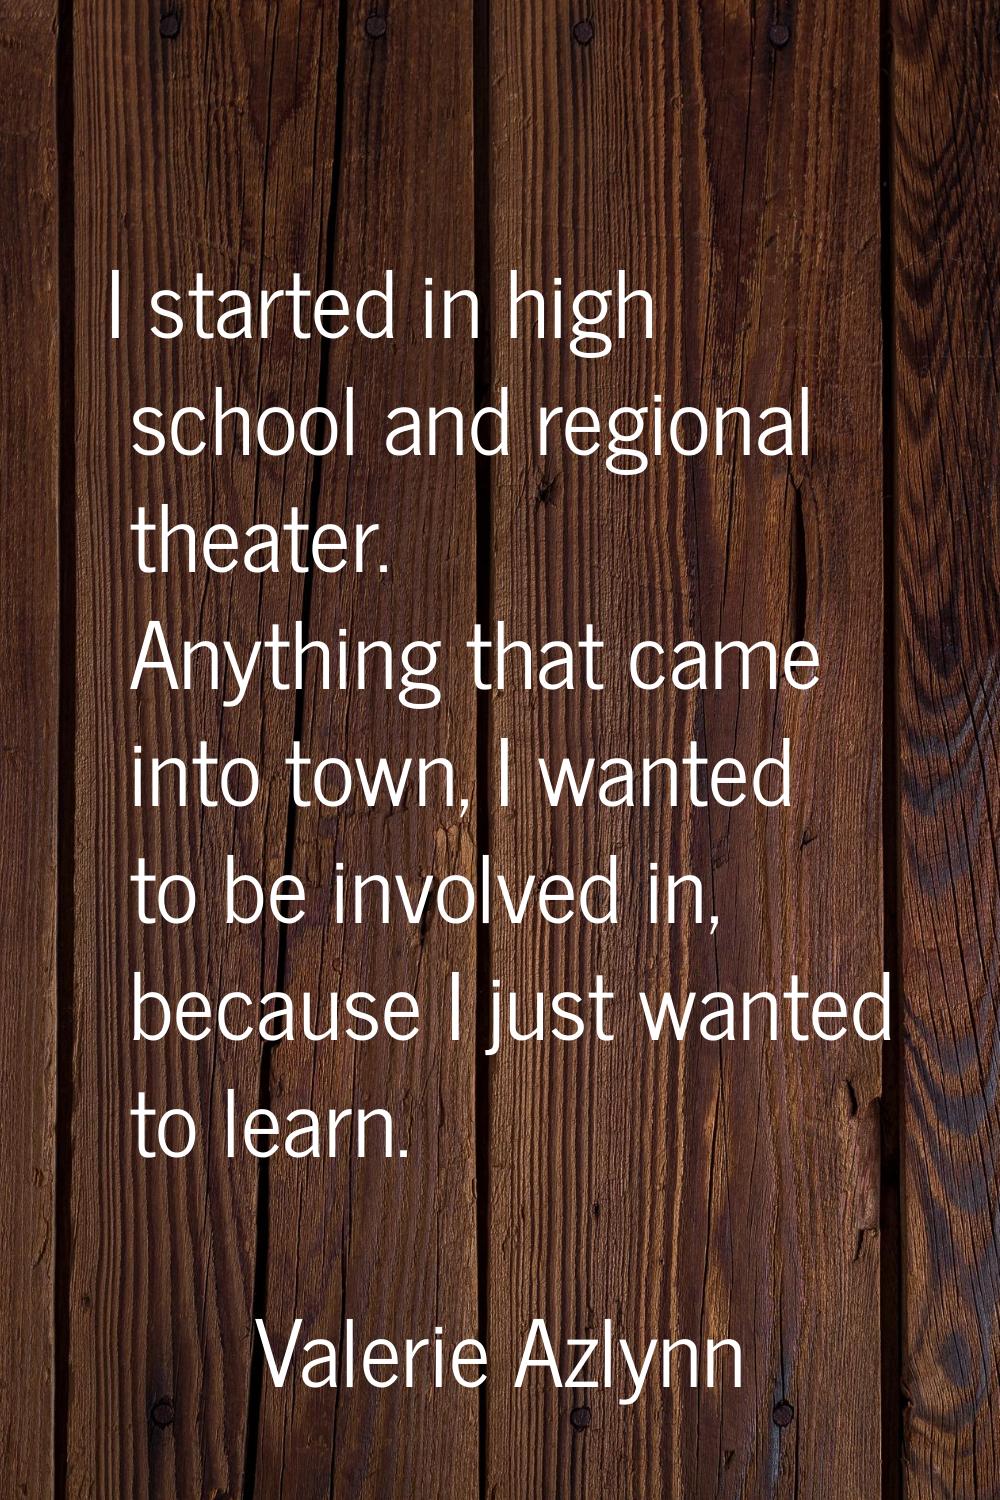 I started in high school and regional theater. Anything that came into town, I wanted to be involve